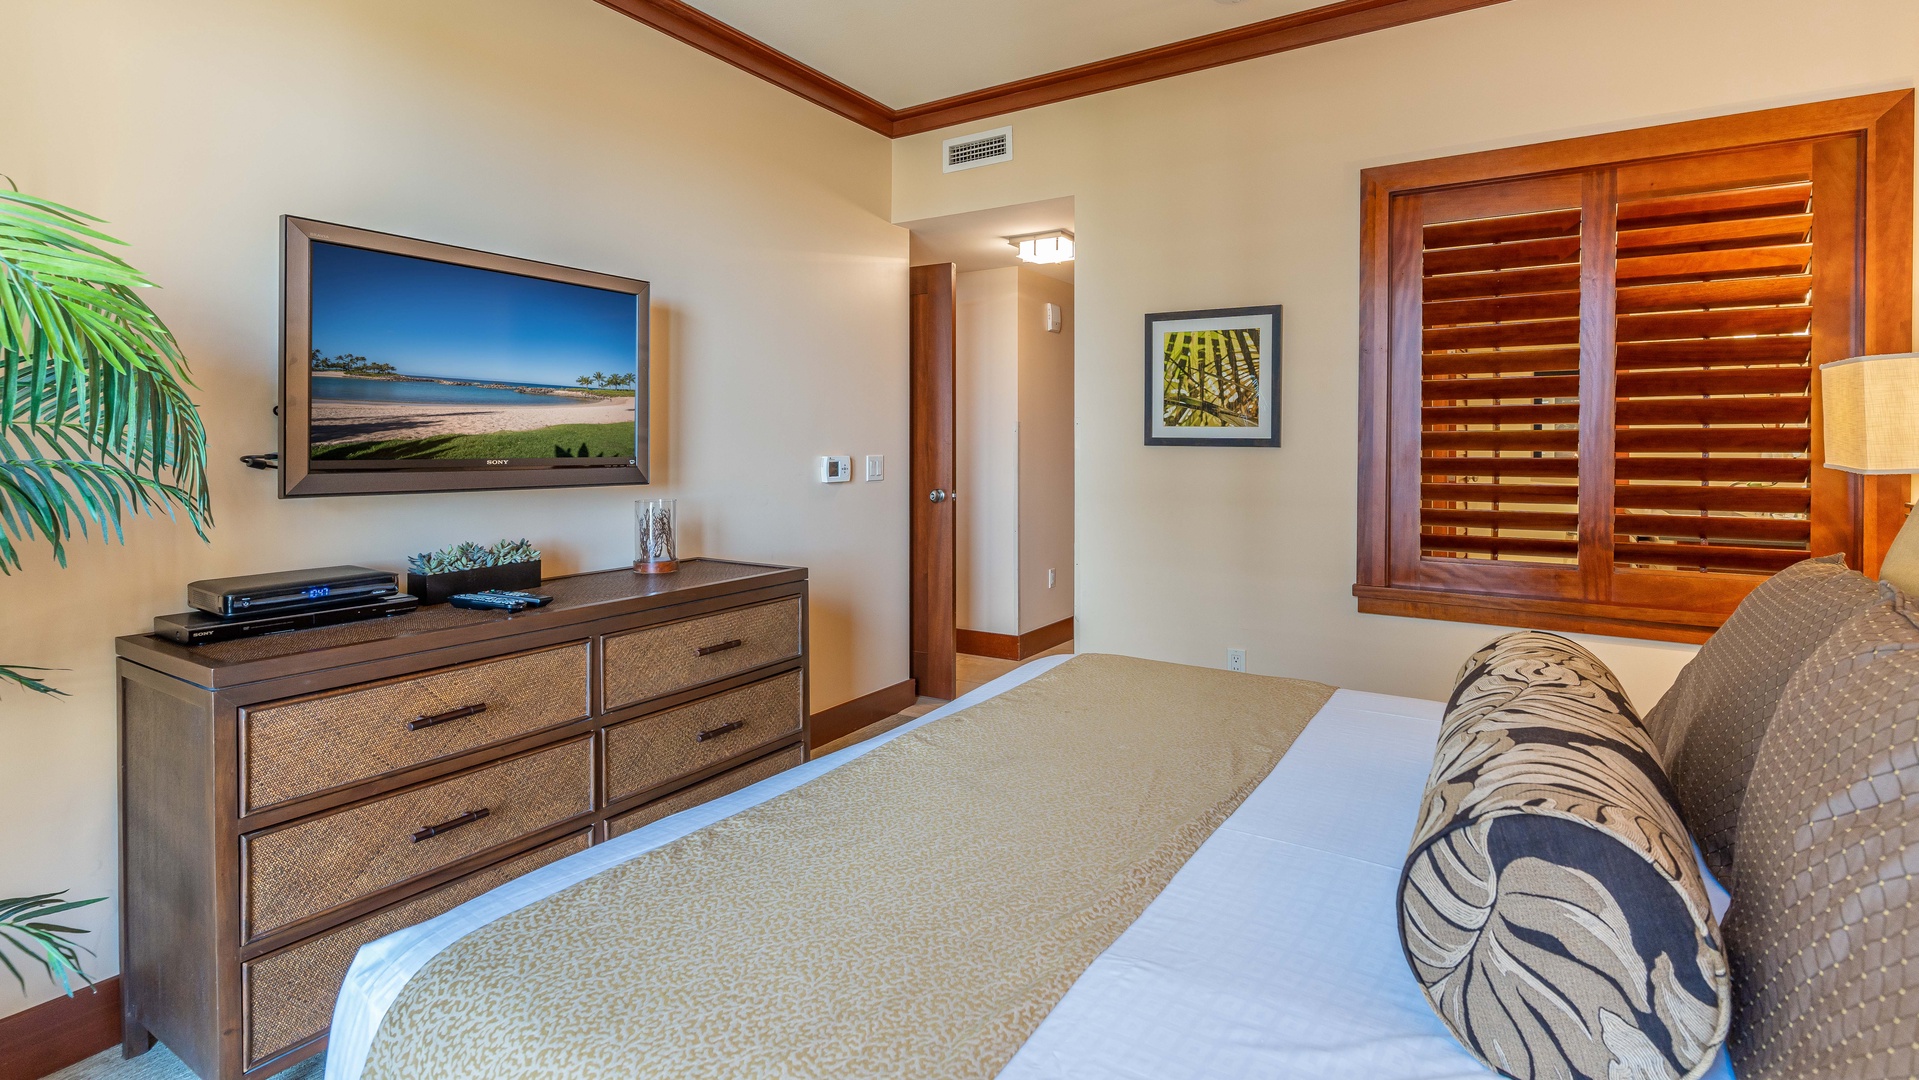 Kapolei Vacation Rentals, Ko Olina Beach Villas O521 - A spacious stay in a relaxing atmosphere.